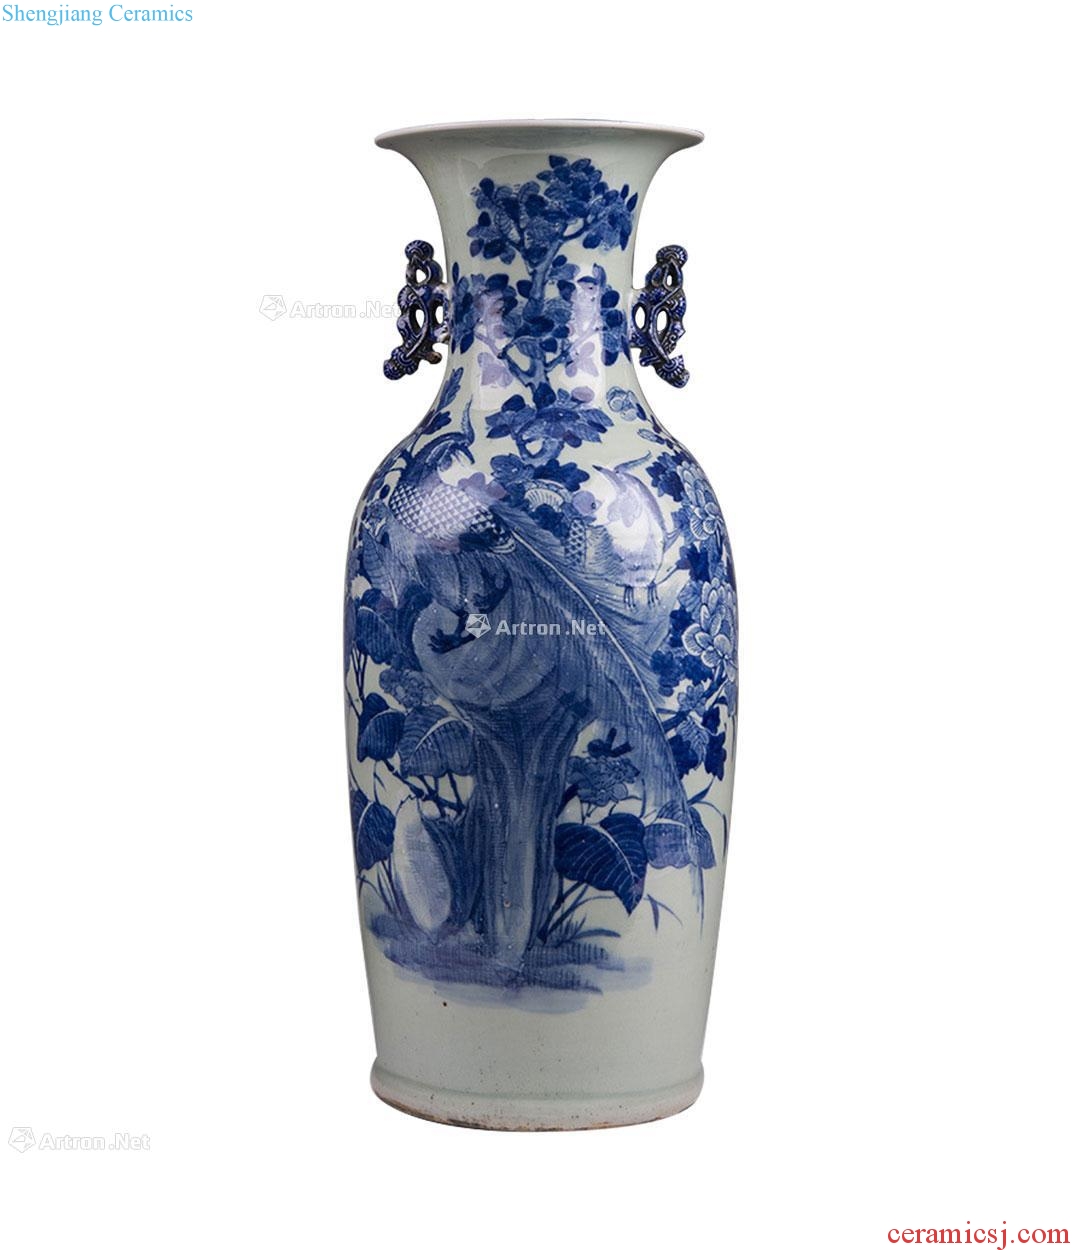 Kangxi pea green glaze blue and white with a silver spoon in her mouth off with a pair of bottle mouth